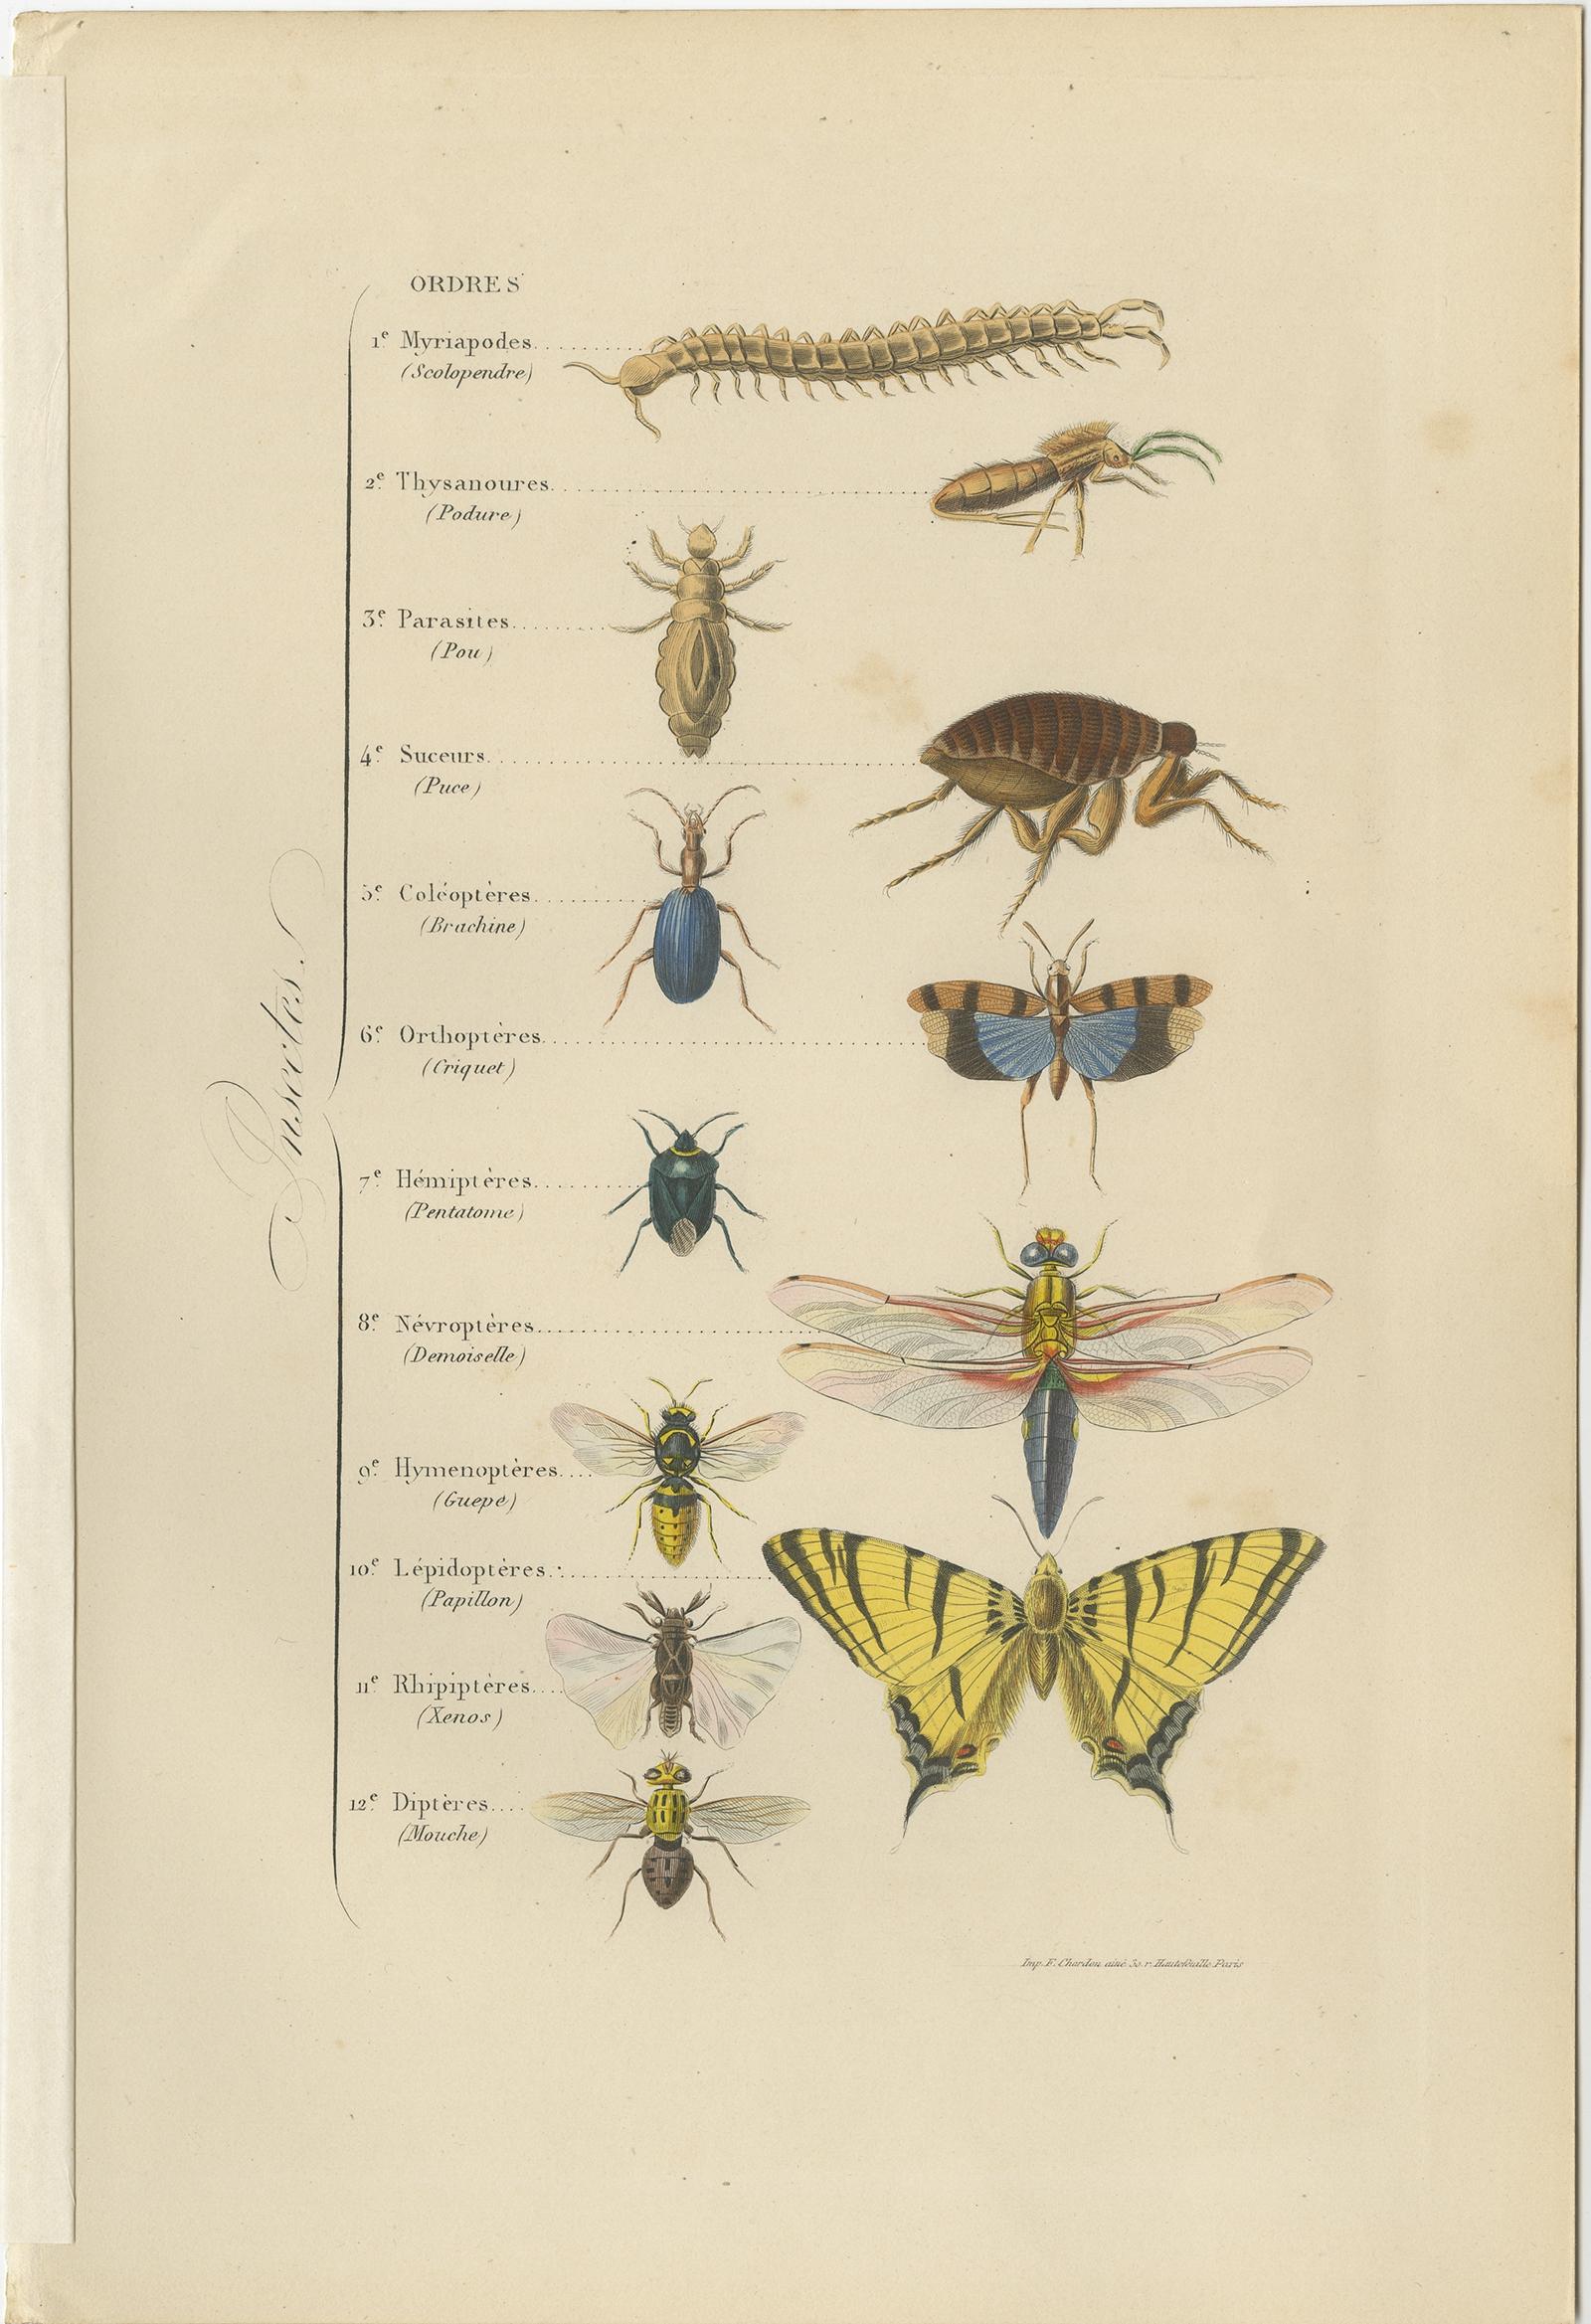 Antique print titled 'Insectes'. 

Print of various insects. This print originates from 'Musée d'Histoire Naturelle' by M. Achille Comte. 

Artists and Engravers: Published by Gustave Havard.